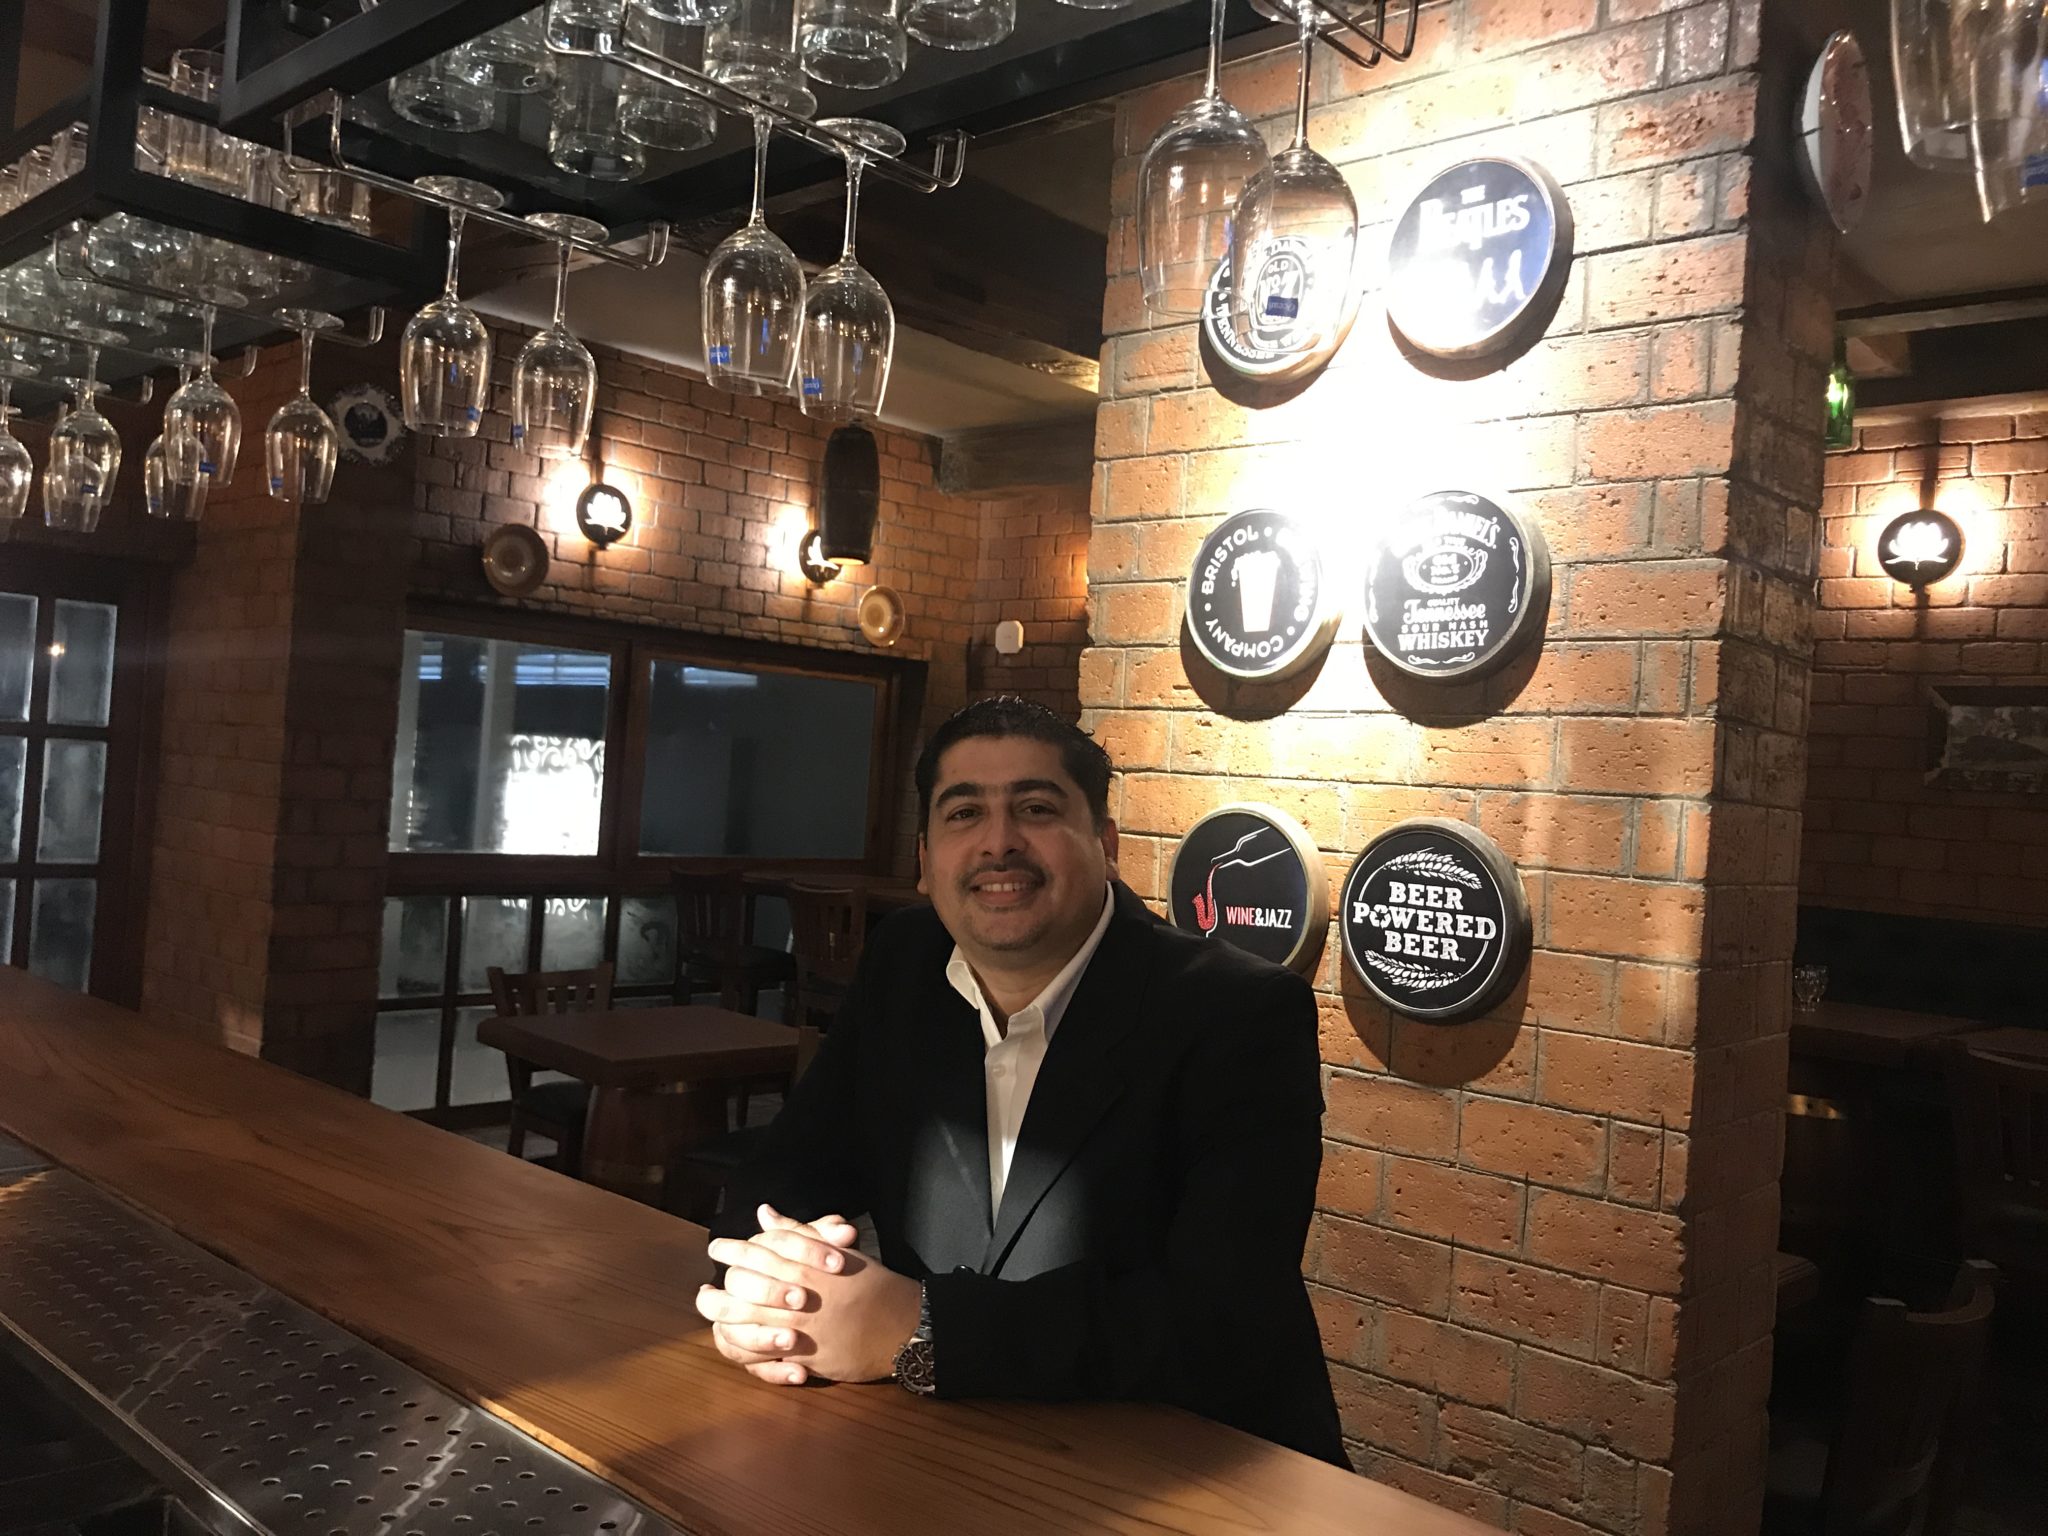 For Sreeram Devarajan, coming to the Philippines to study at the Asian School of Hospitality Arts brought him closer to his goals